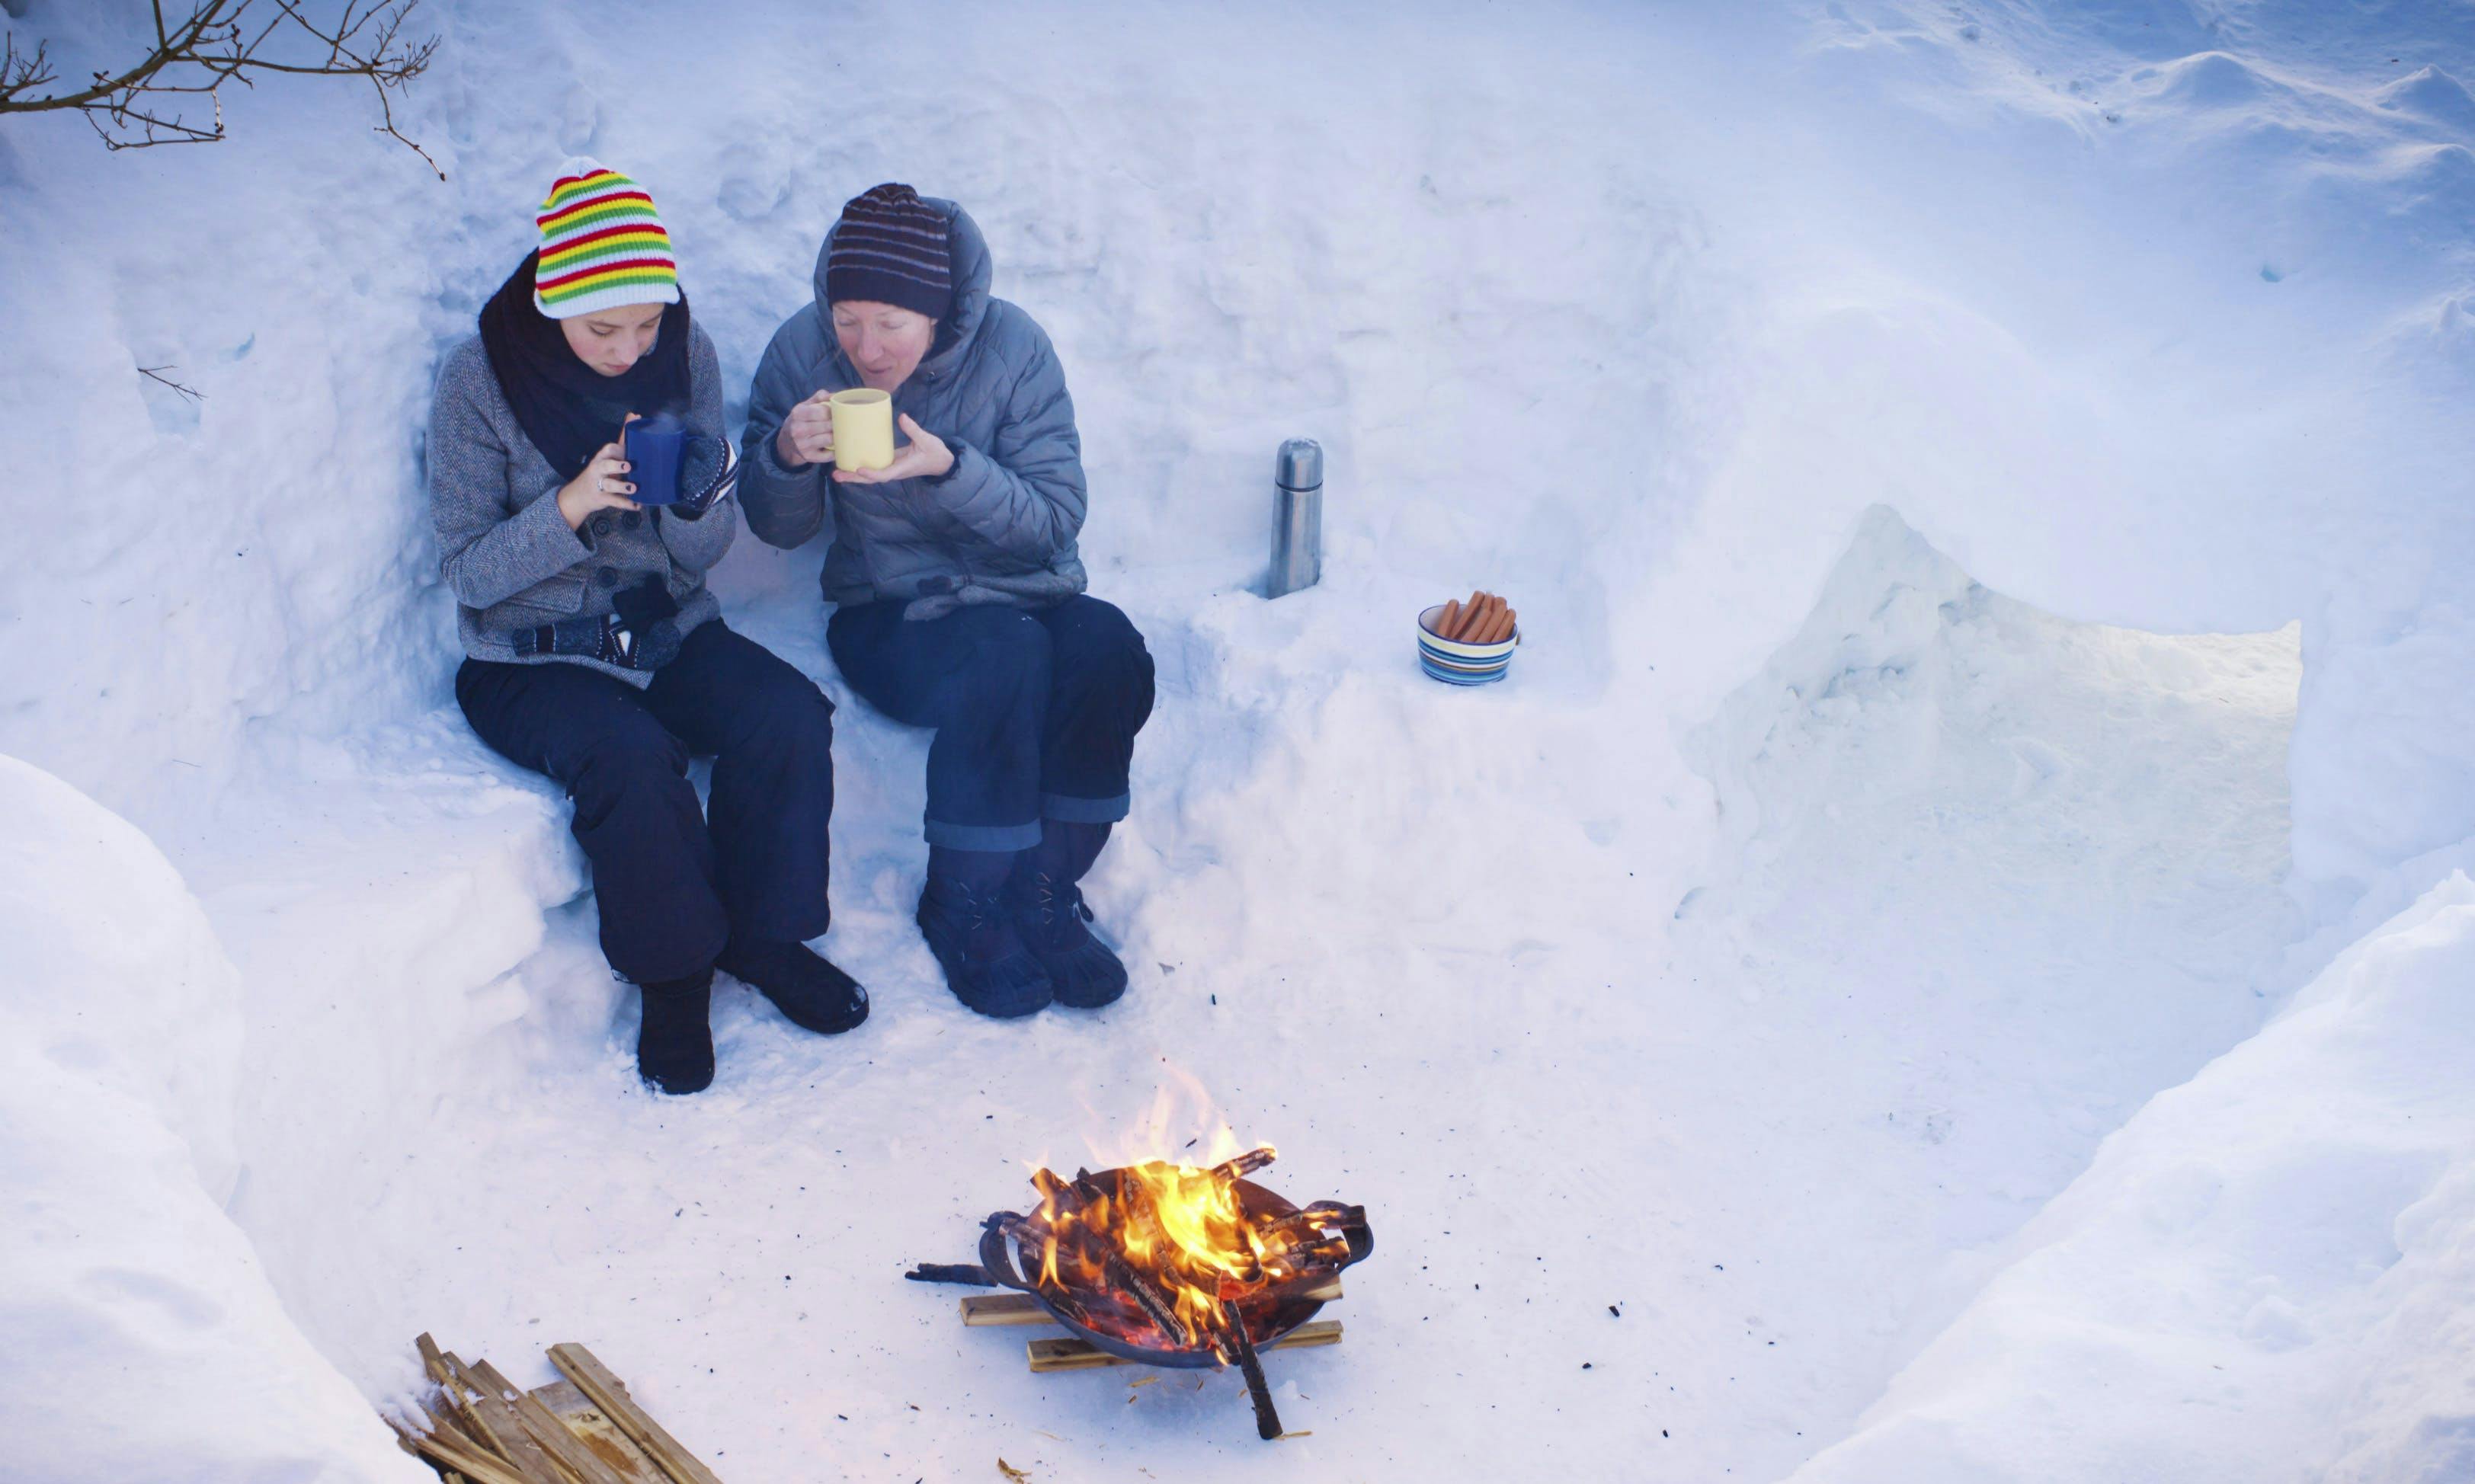 Two people sitting in the snow, sipping hot drinks with a Thermos nearby